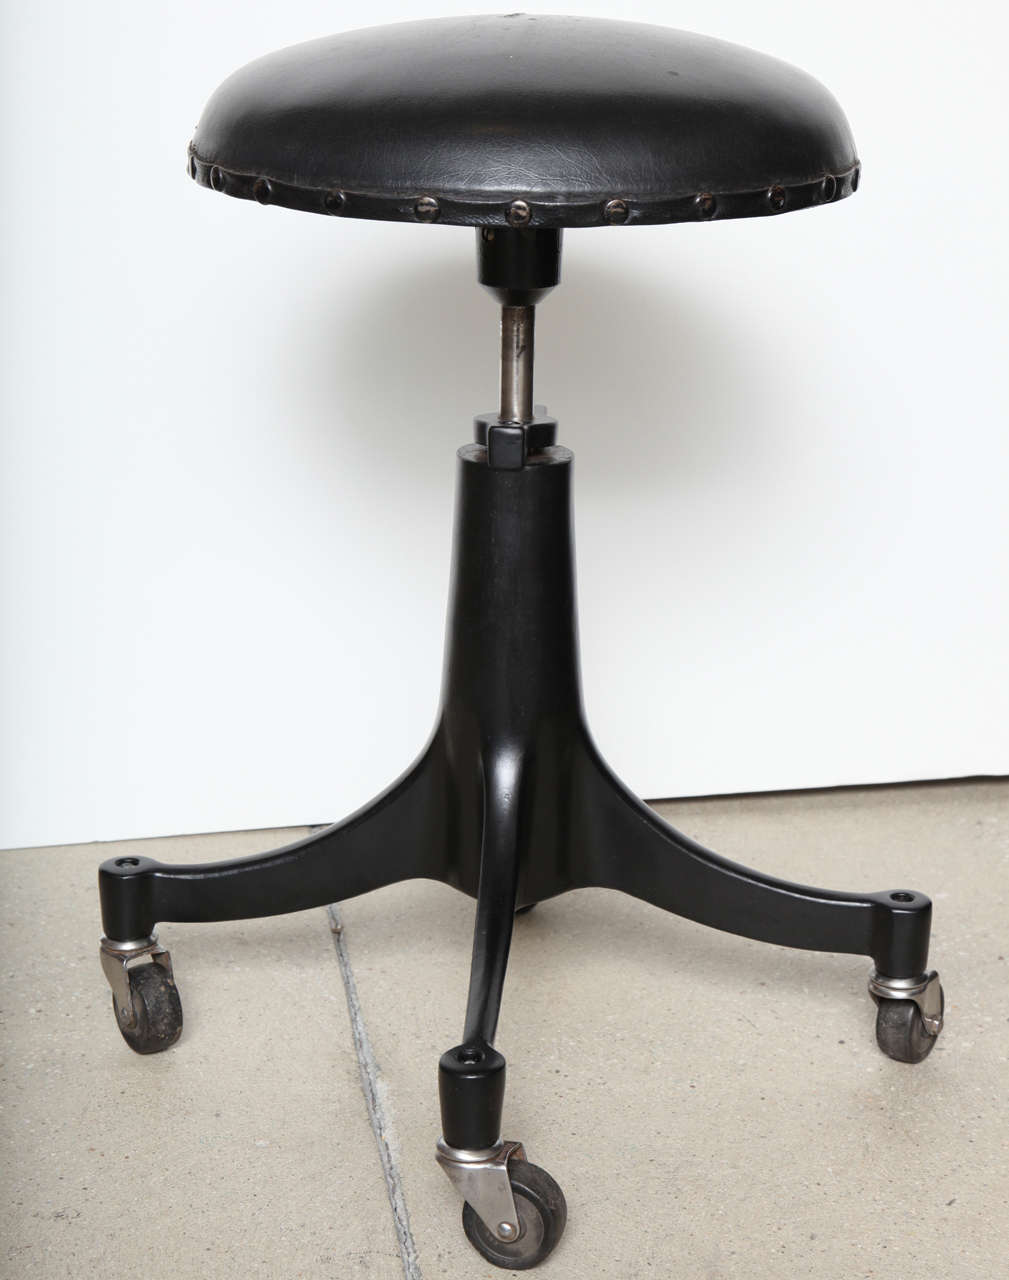 Pair of black metal stools by Bausch & Lomb.  USA, circa 1940.  Sold and priced as a pair; please contact us if you require additional matching stools.  Features an adjustable seat height, casters and black leather seat.  Ideal as counter bar